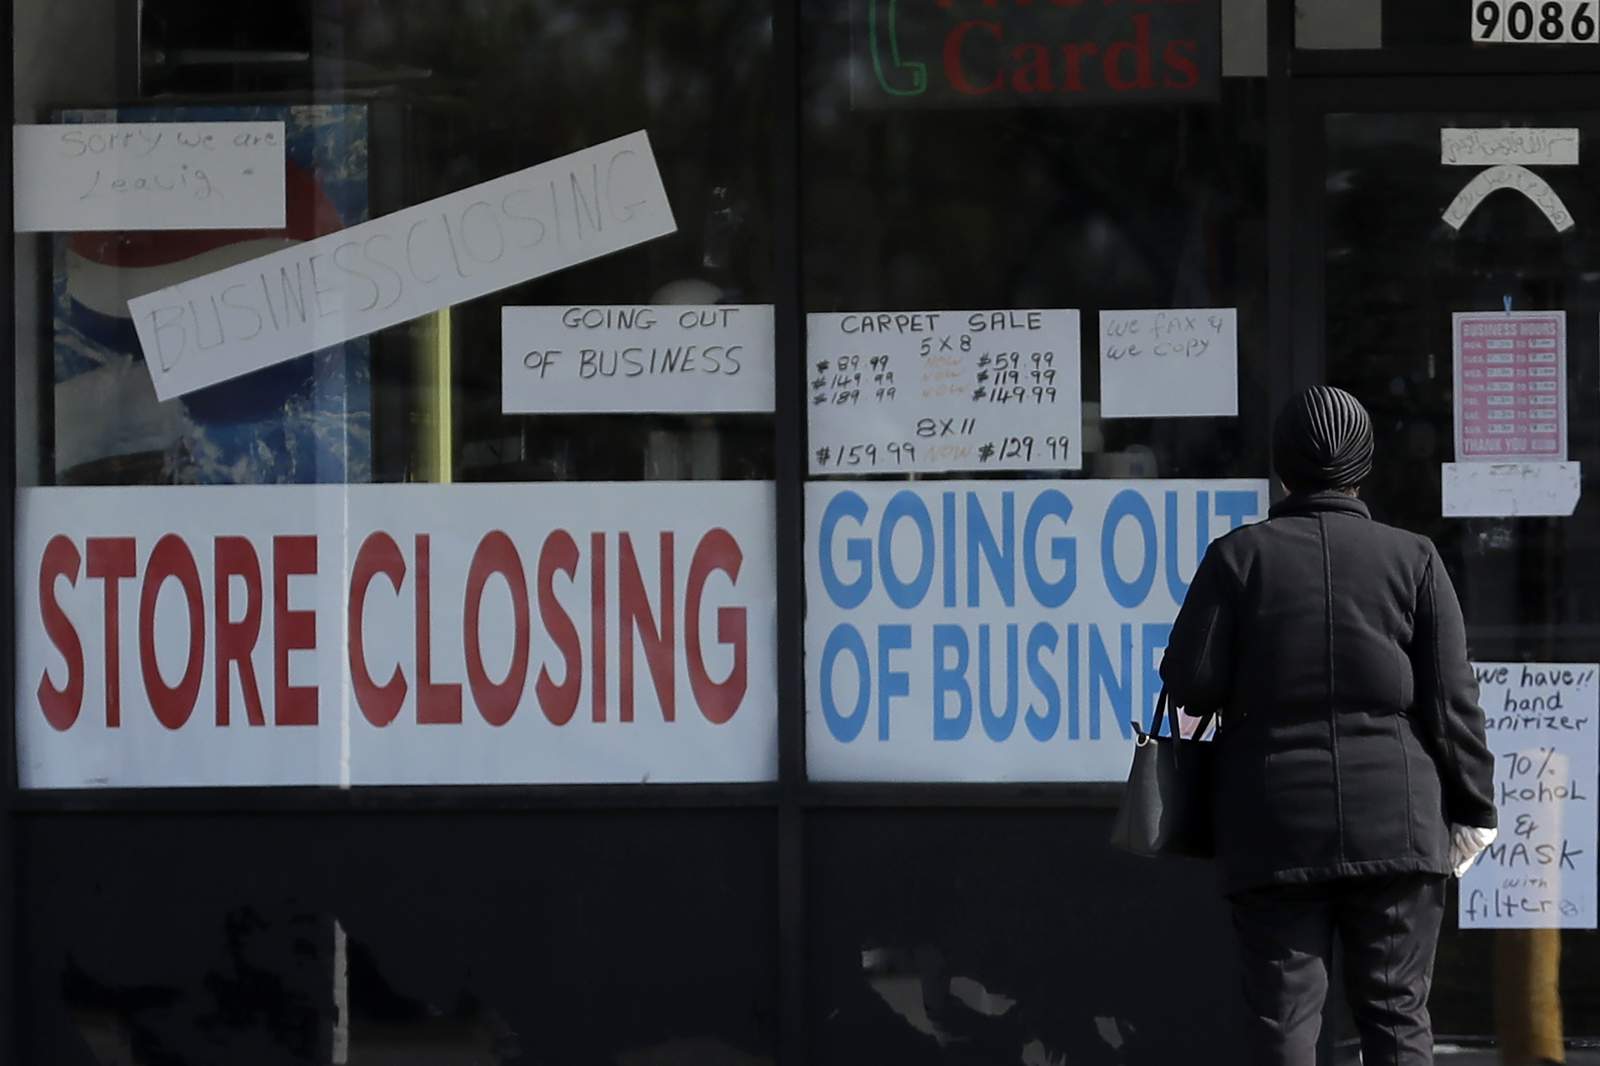 Job market remains grim even as U.S. tentatively reopens